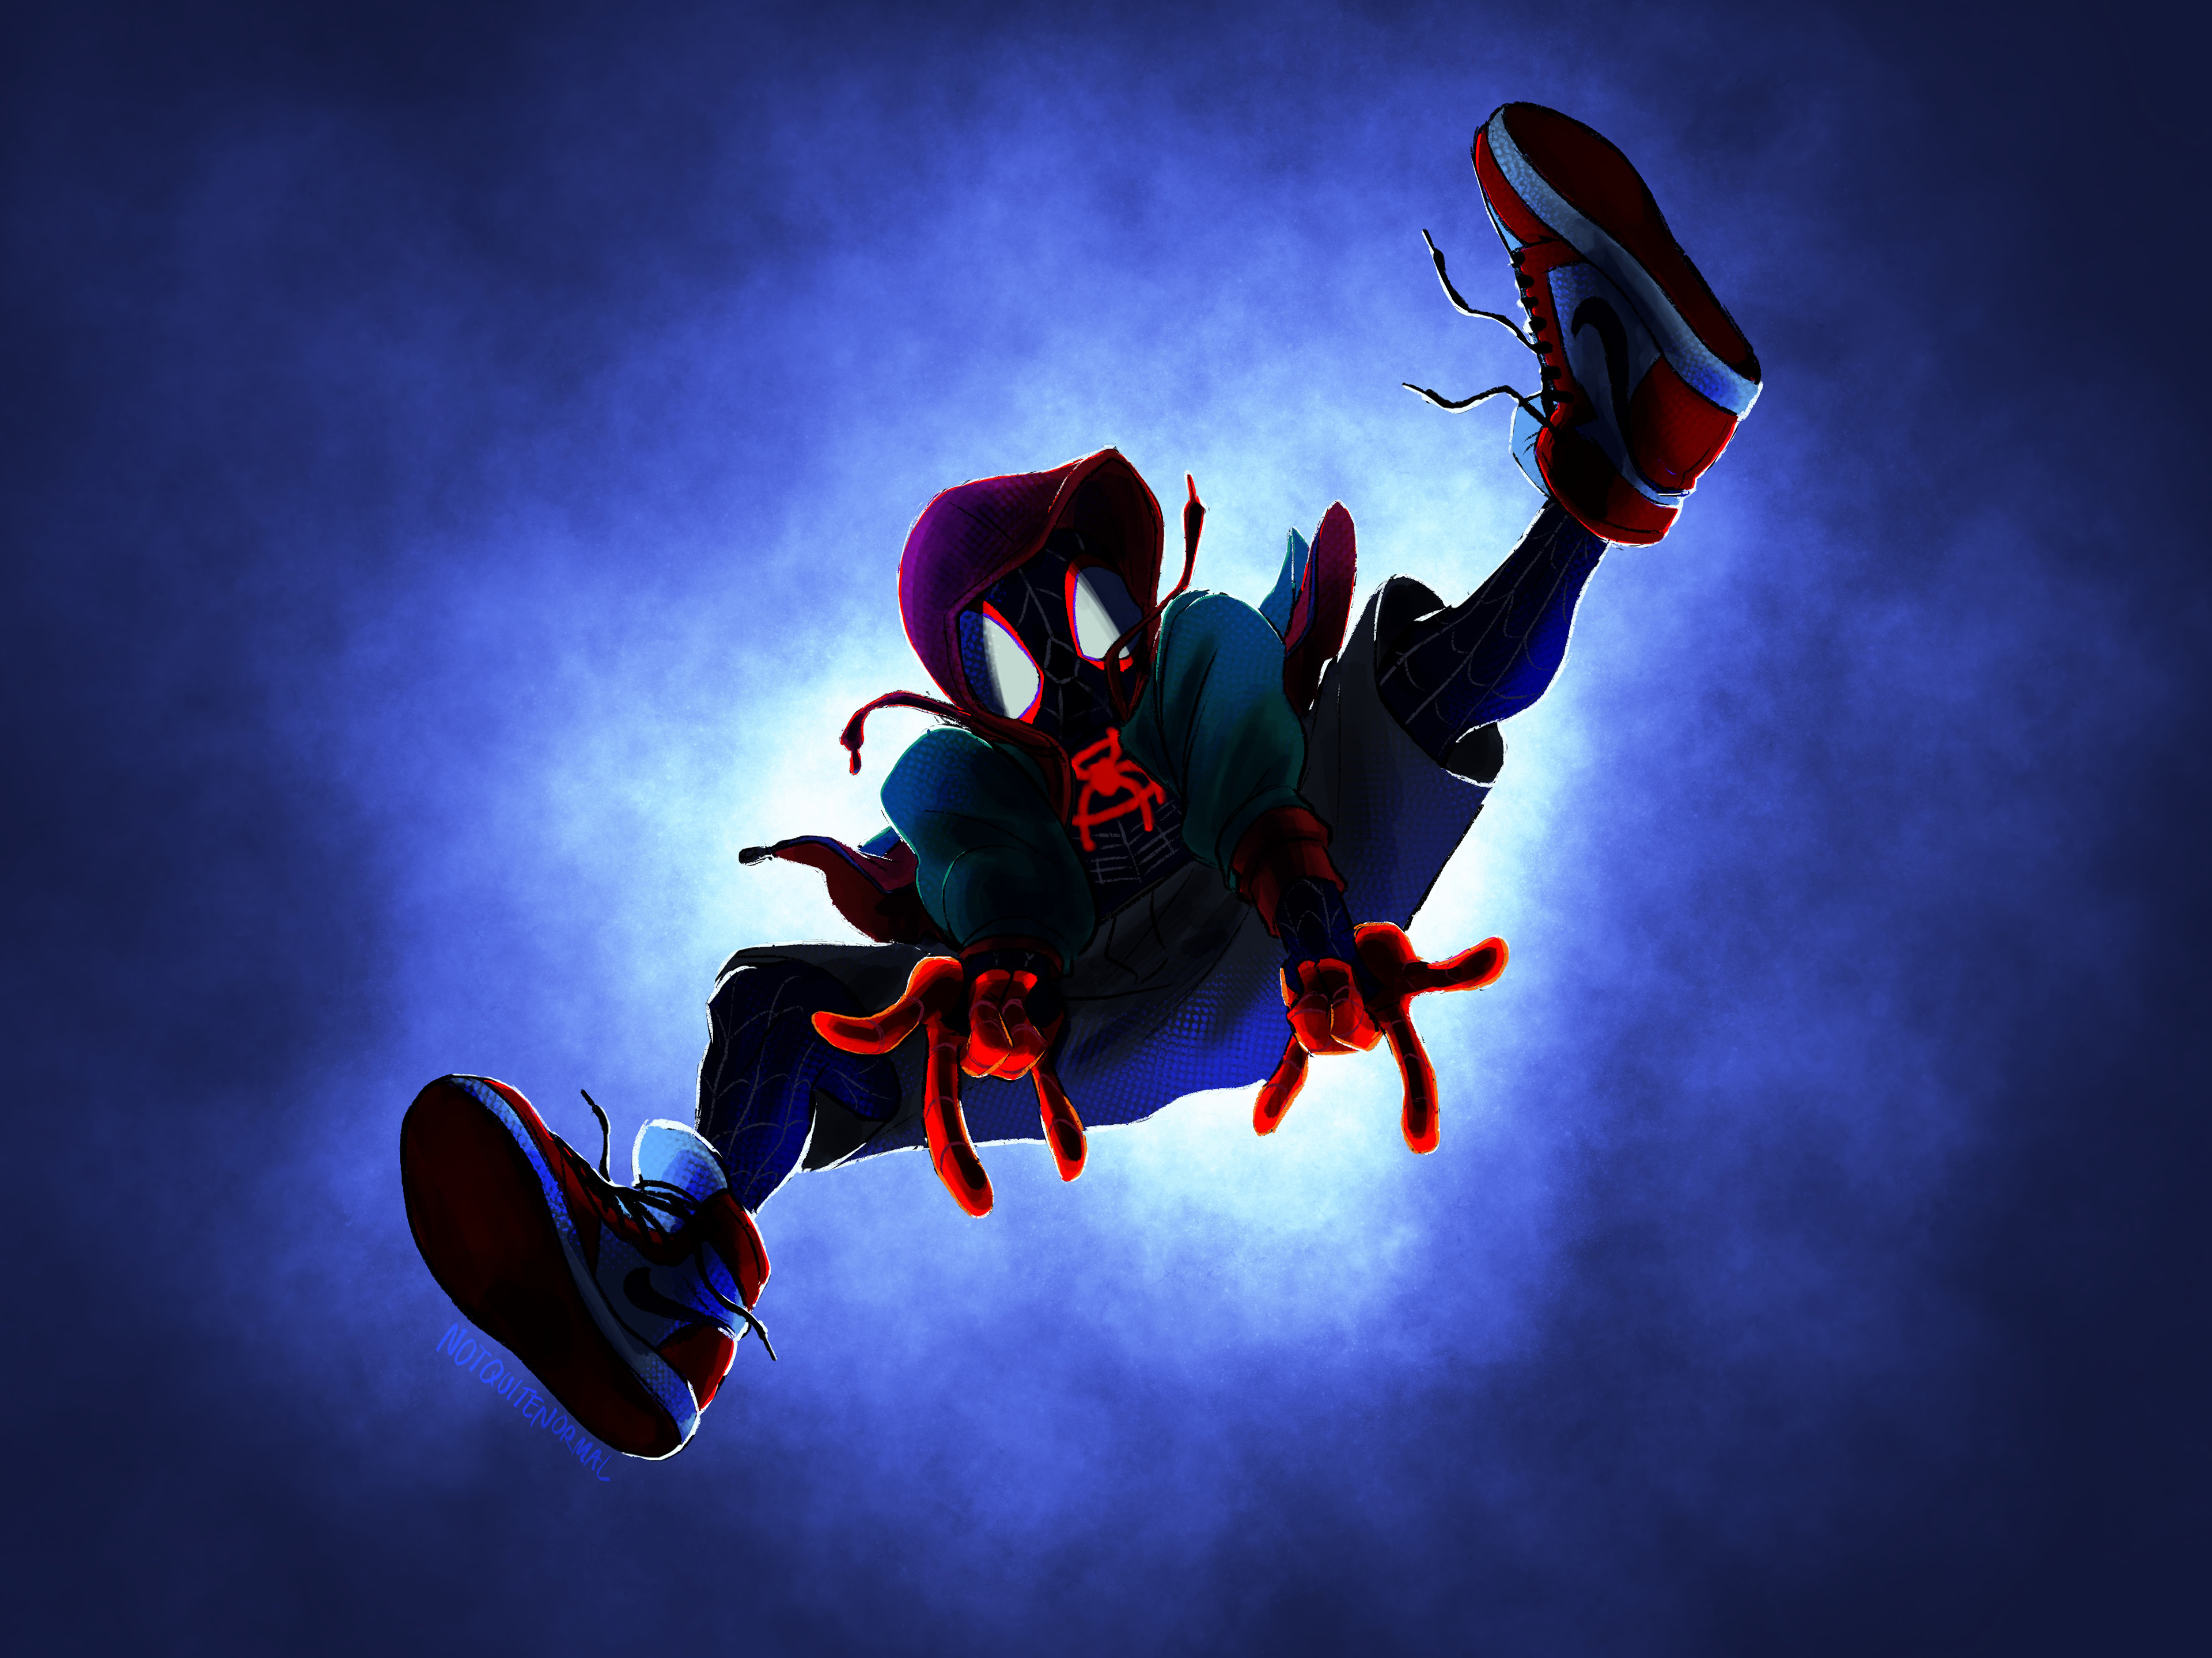 Miles Morales in Spider-Man Into the Spider-Verse Wallpaper 4k Ultra HD  ID:3483